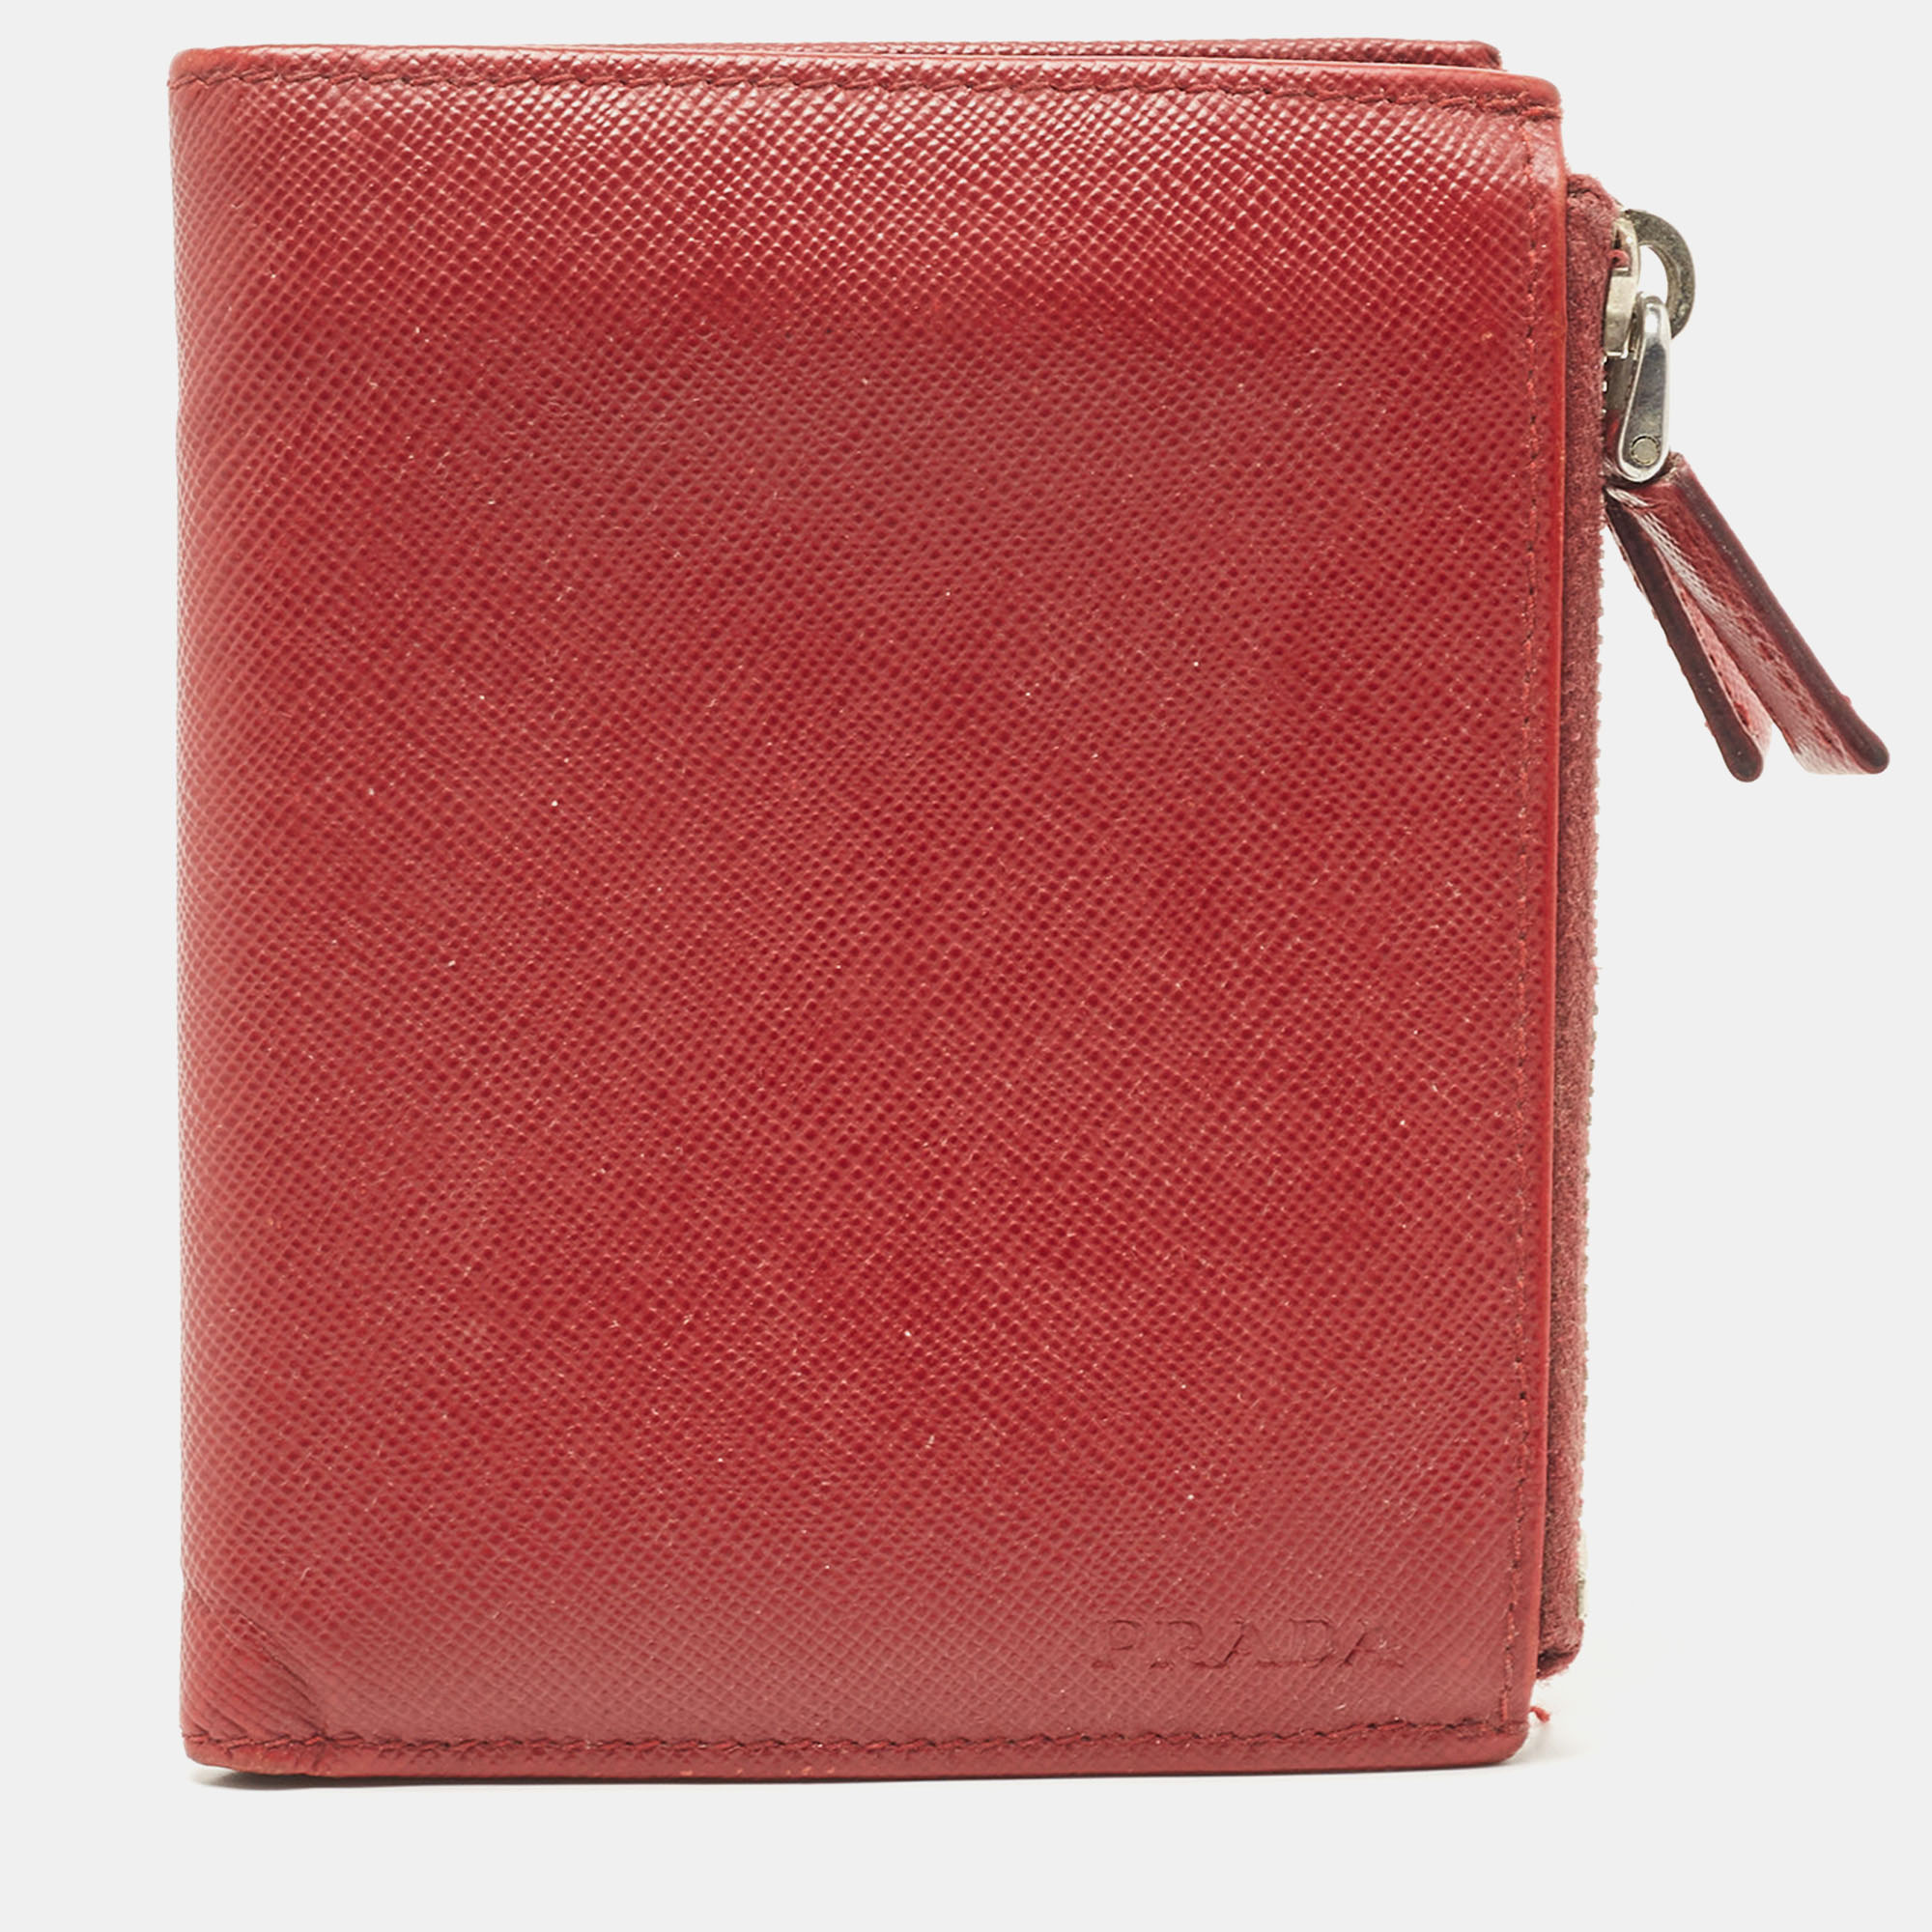 Prada Red Leather Compact Flap Wallet